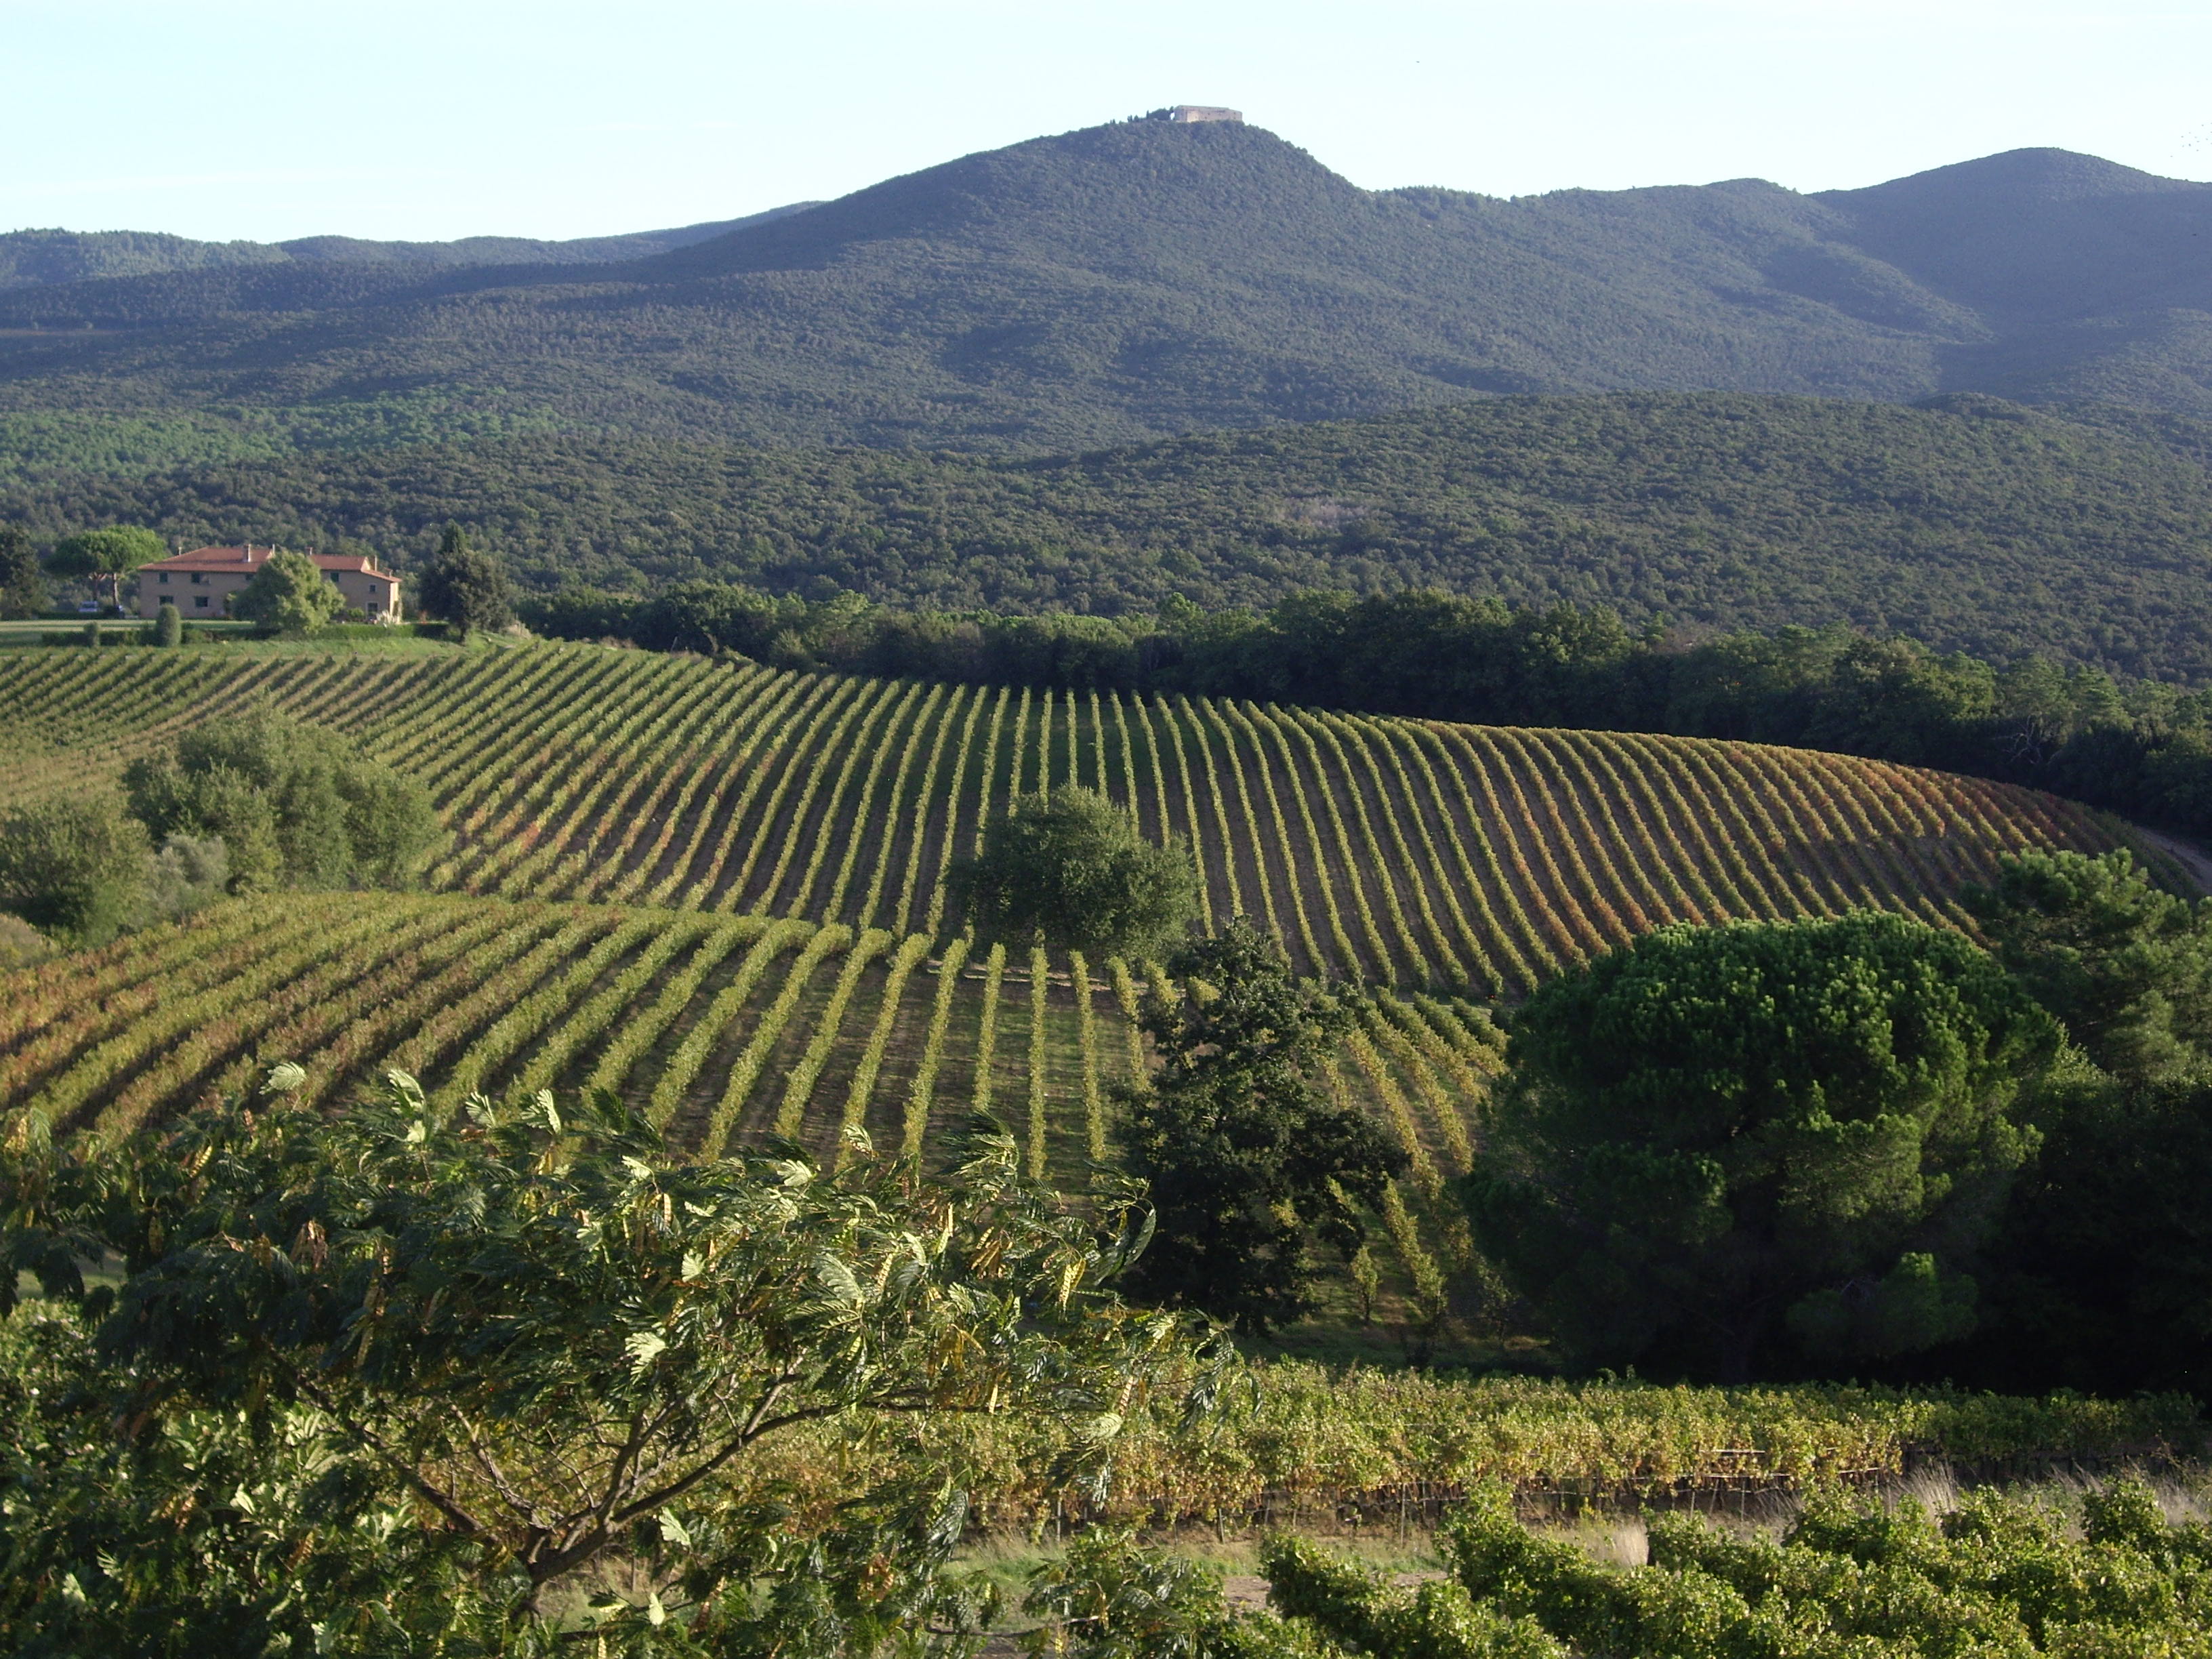 Landscape of vineyards with mountains behind